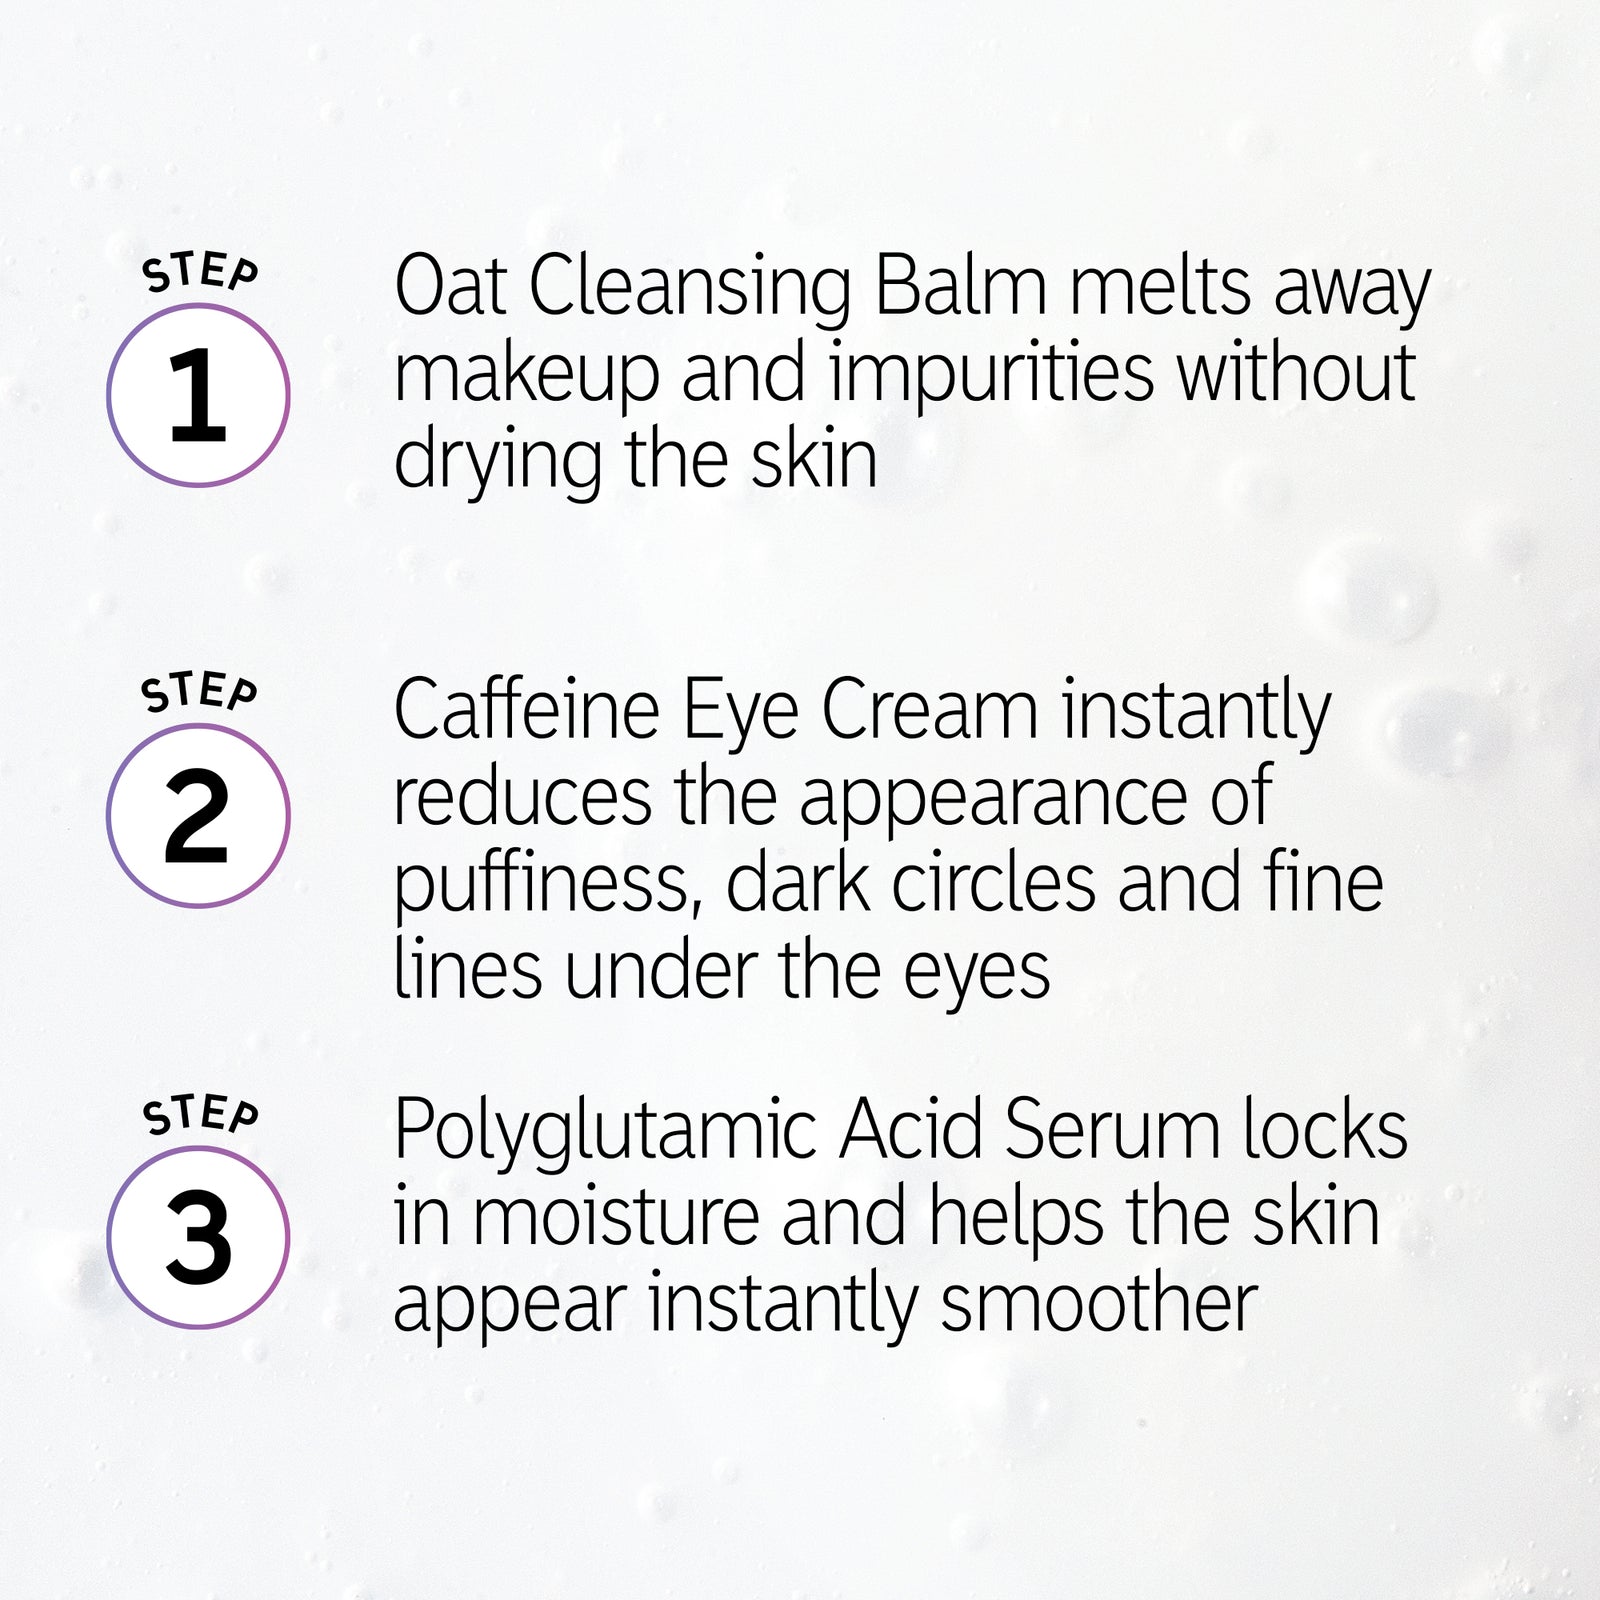 Make Up Prep Trio steps 1-3 with text ' Step 1. Oat Cleansing Balm melts away makeup and impurities without drying the skin Step 2. Caffeine Eye Cream instantly reduces the appearance of puffiness dark circles and fine lines Step 3. Polyglutamic Acid locks in moisture and helps skin appear instantly smoother'